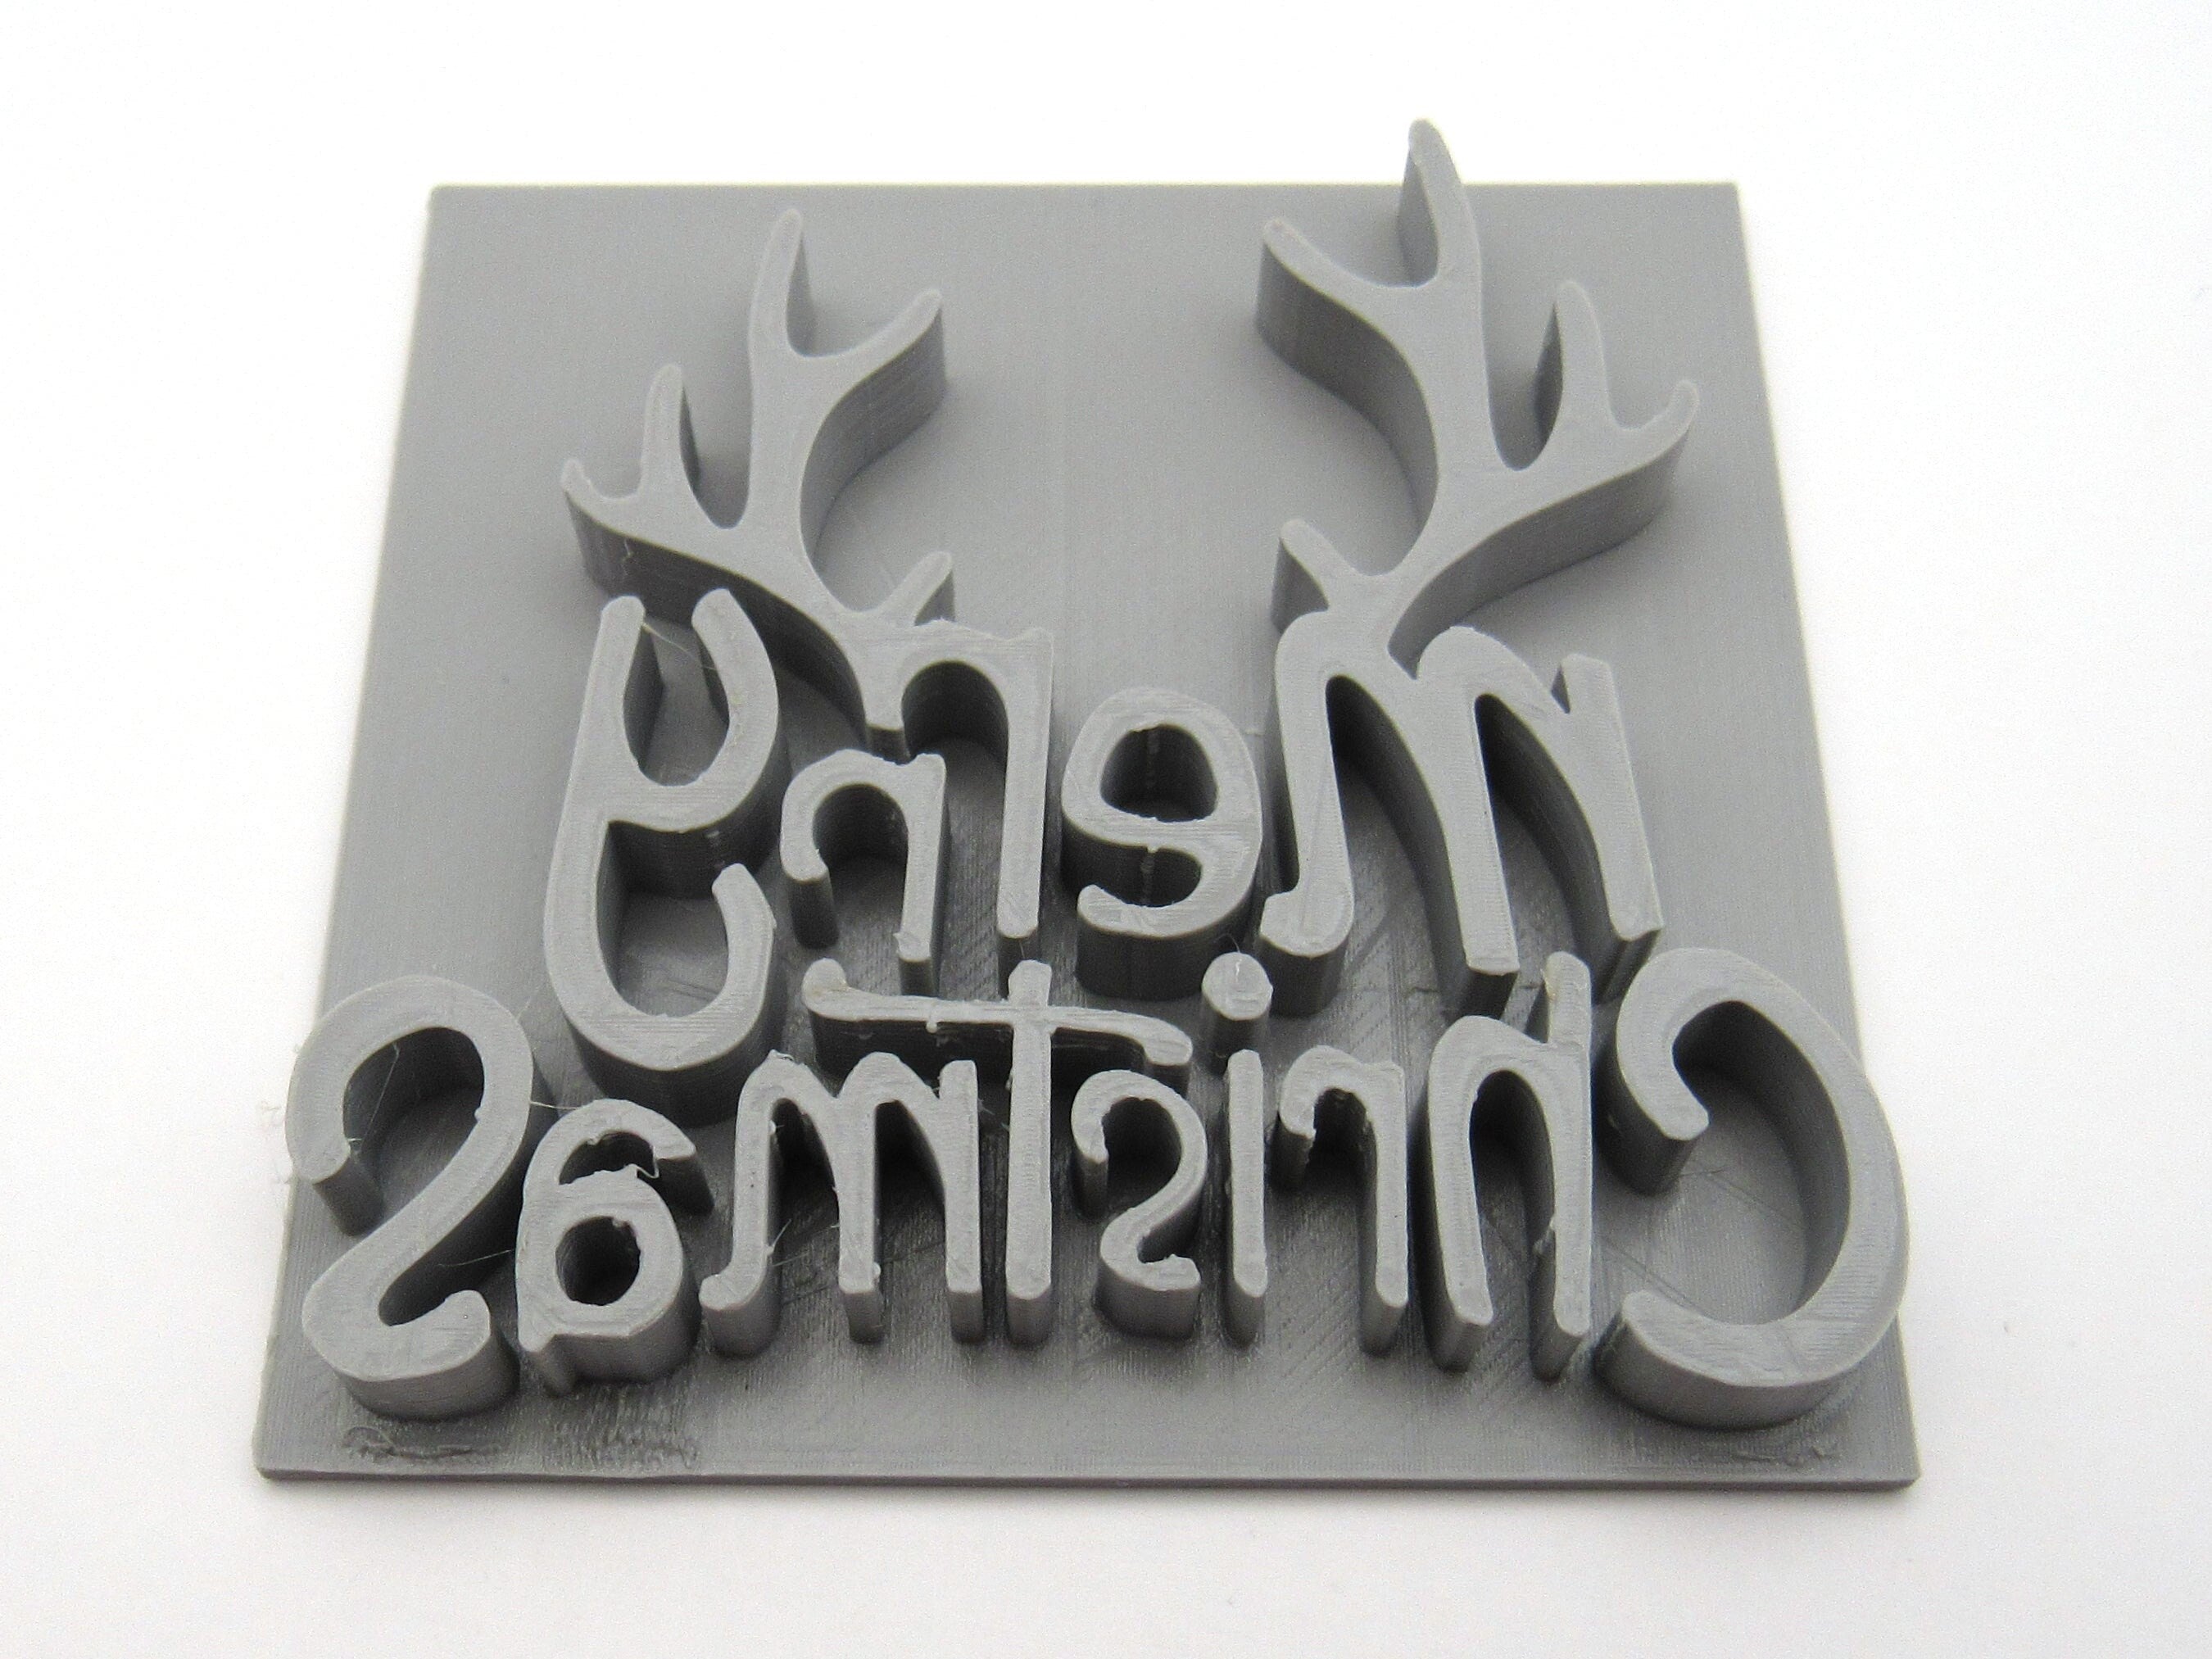 Merry Christmas with Antlers Mug Clay Stamp for handbuild pottery